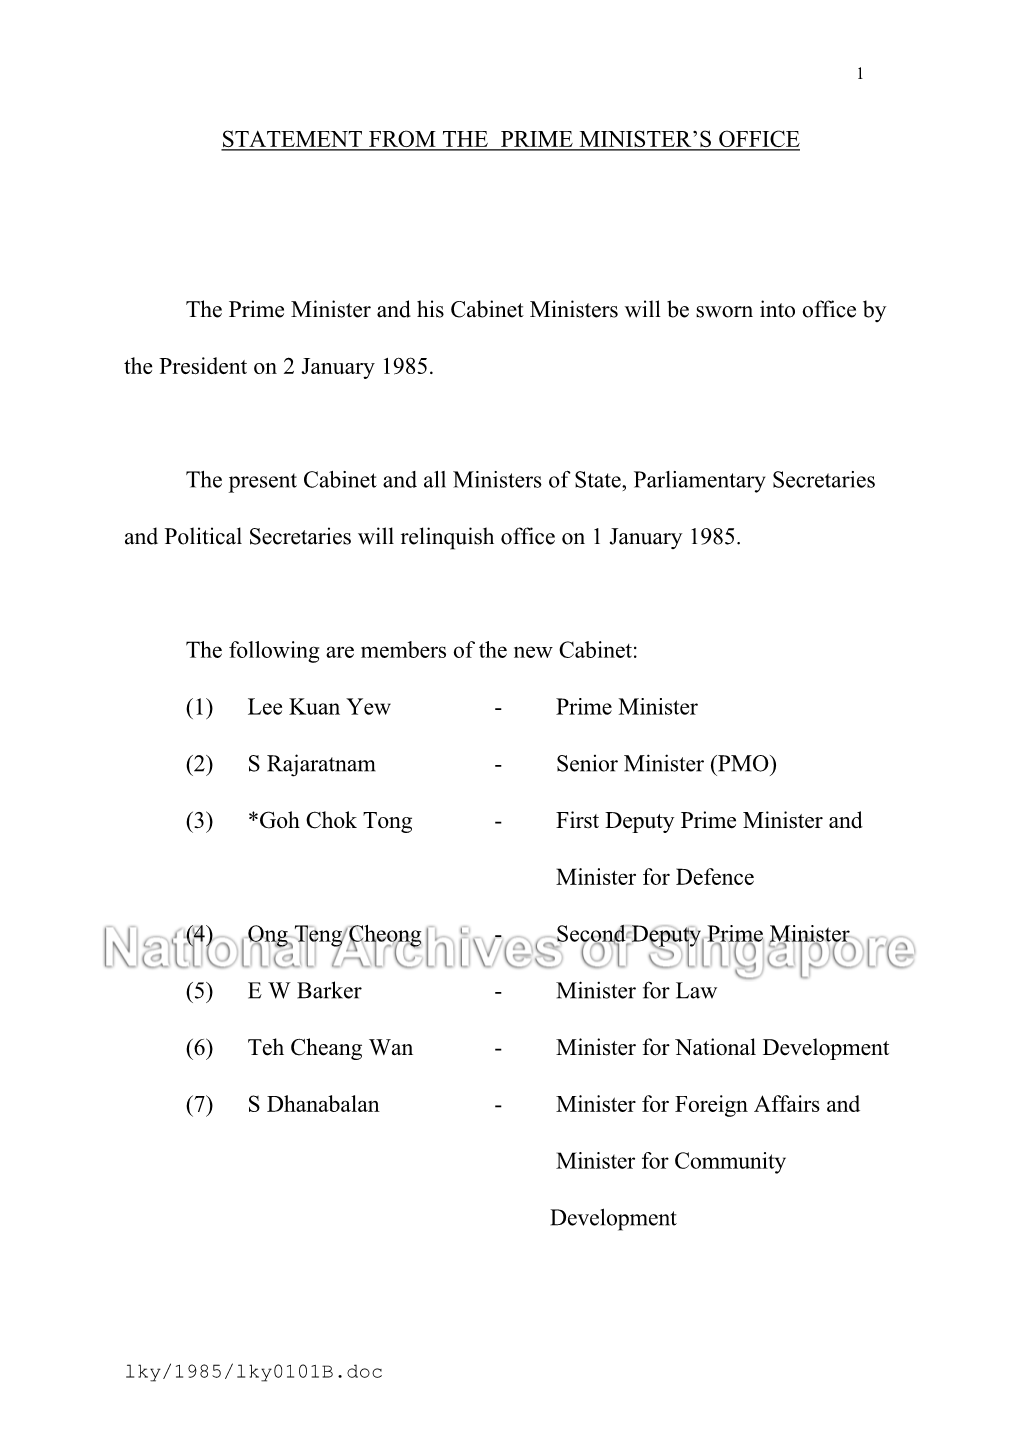 STATEMENT from the PRIME MINISTER's OFFICE the Prime Minister and His Cabinet Ministers Will Be Sworn Into Office by the Pres